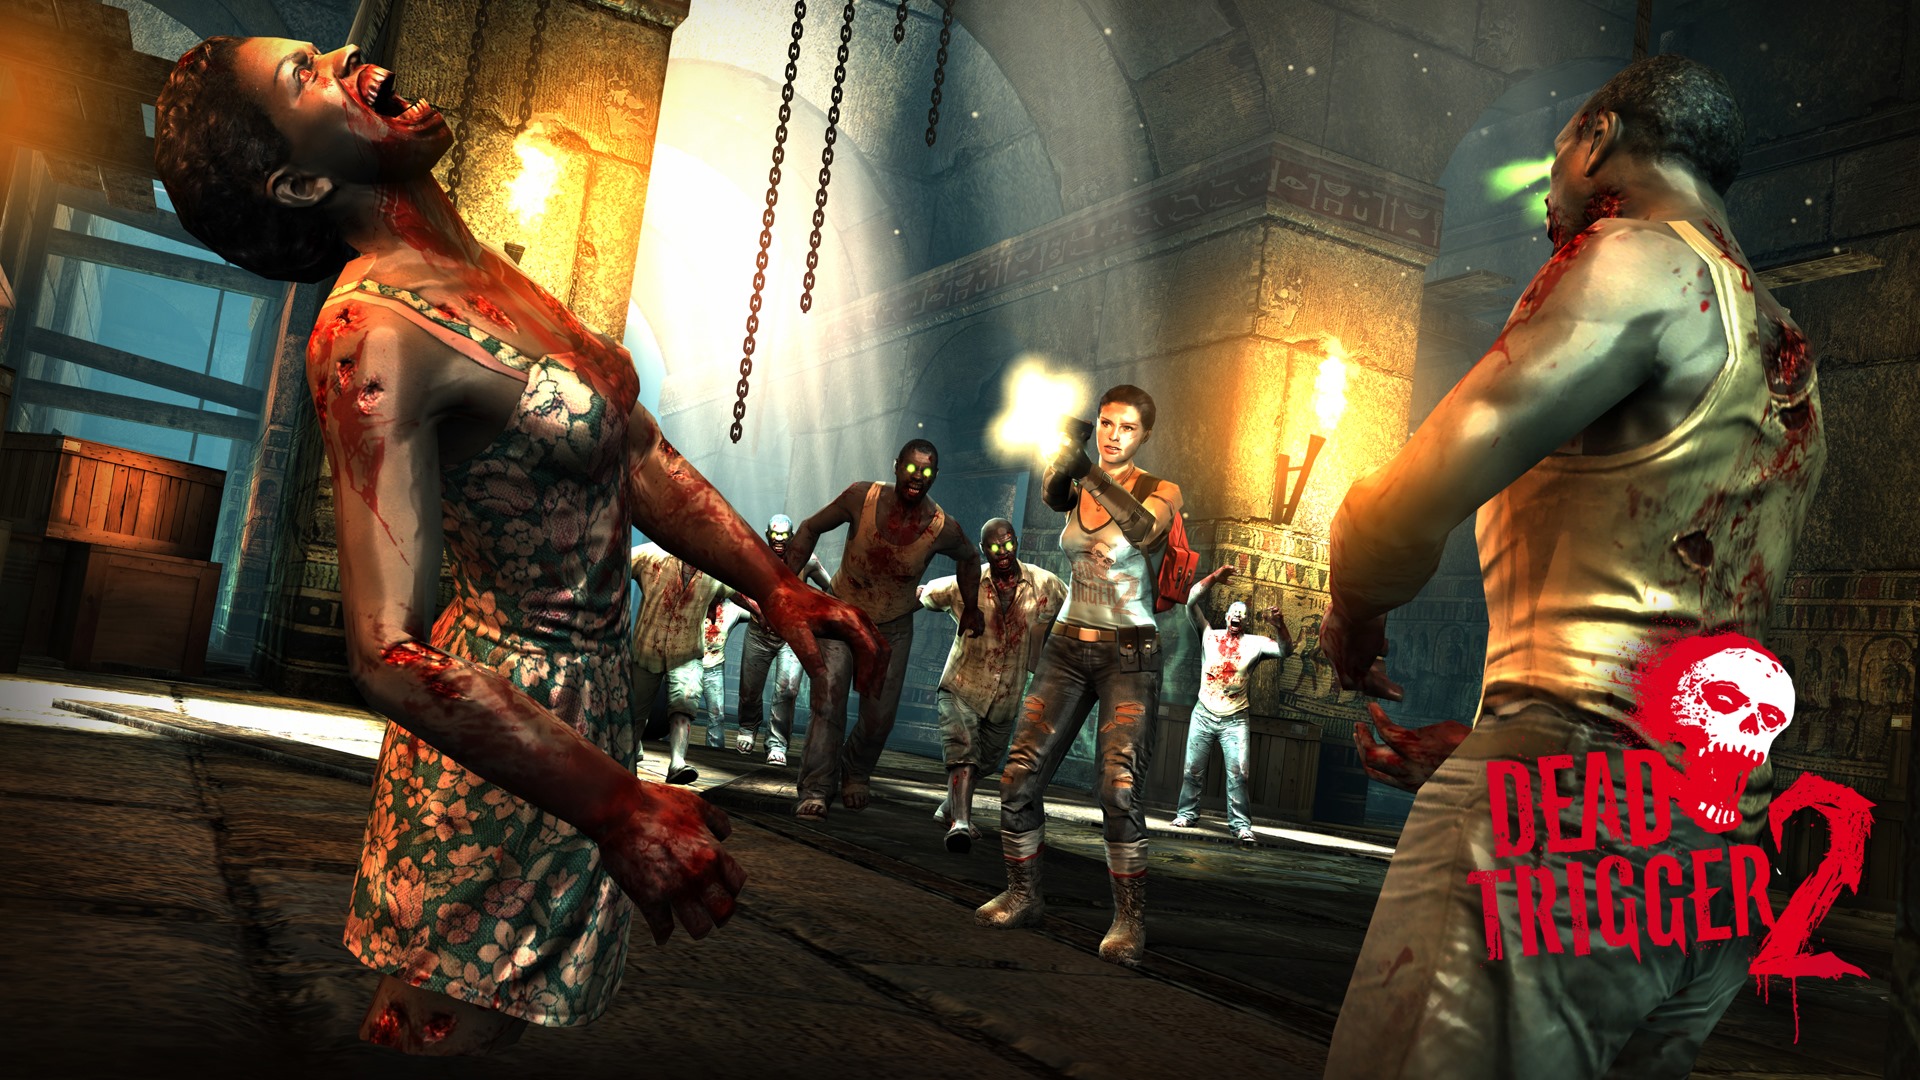 Dead trigger 2 full game free download for android